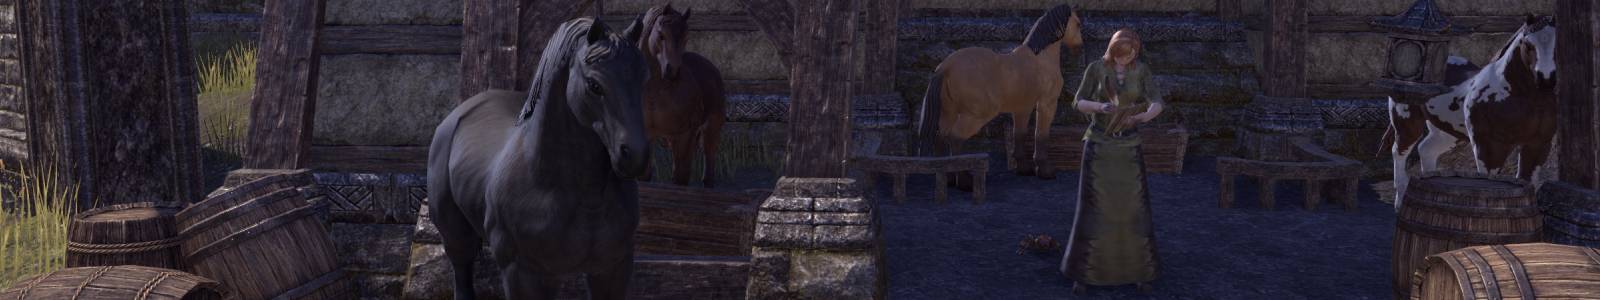 How to Obtain and Use a Mount in ESO - Elder Scrolls Online header